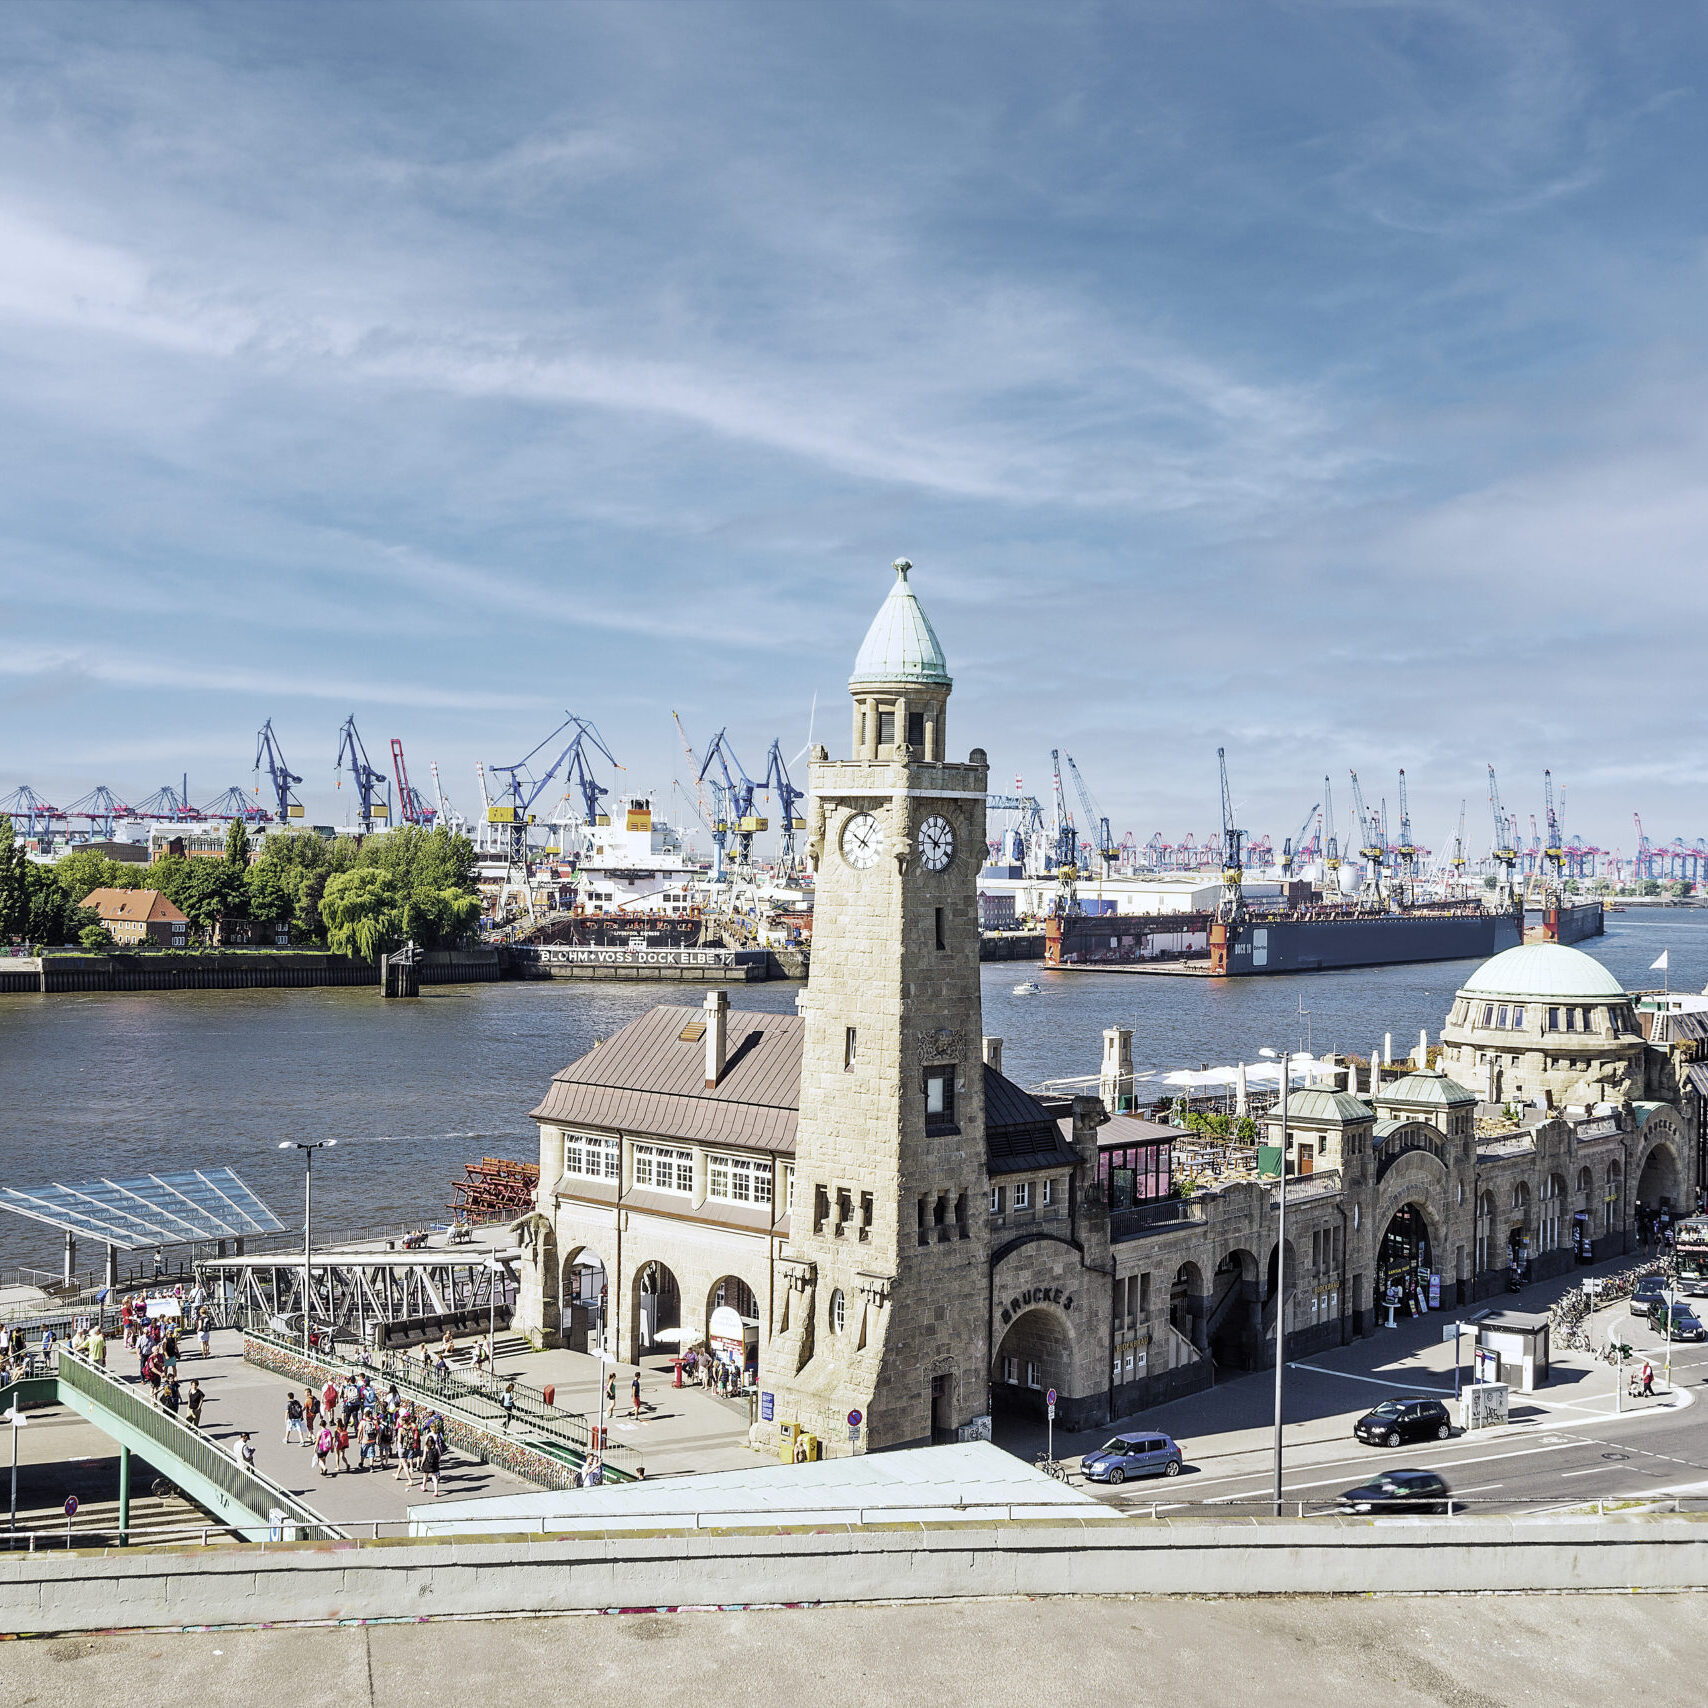 City of Hamburg with river Elbe and Harbour, Germany